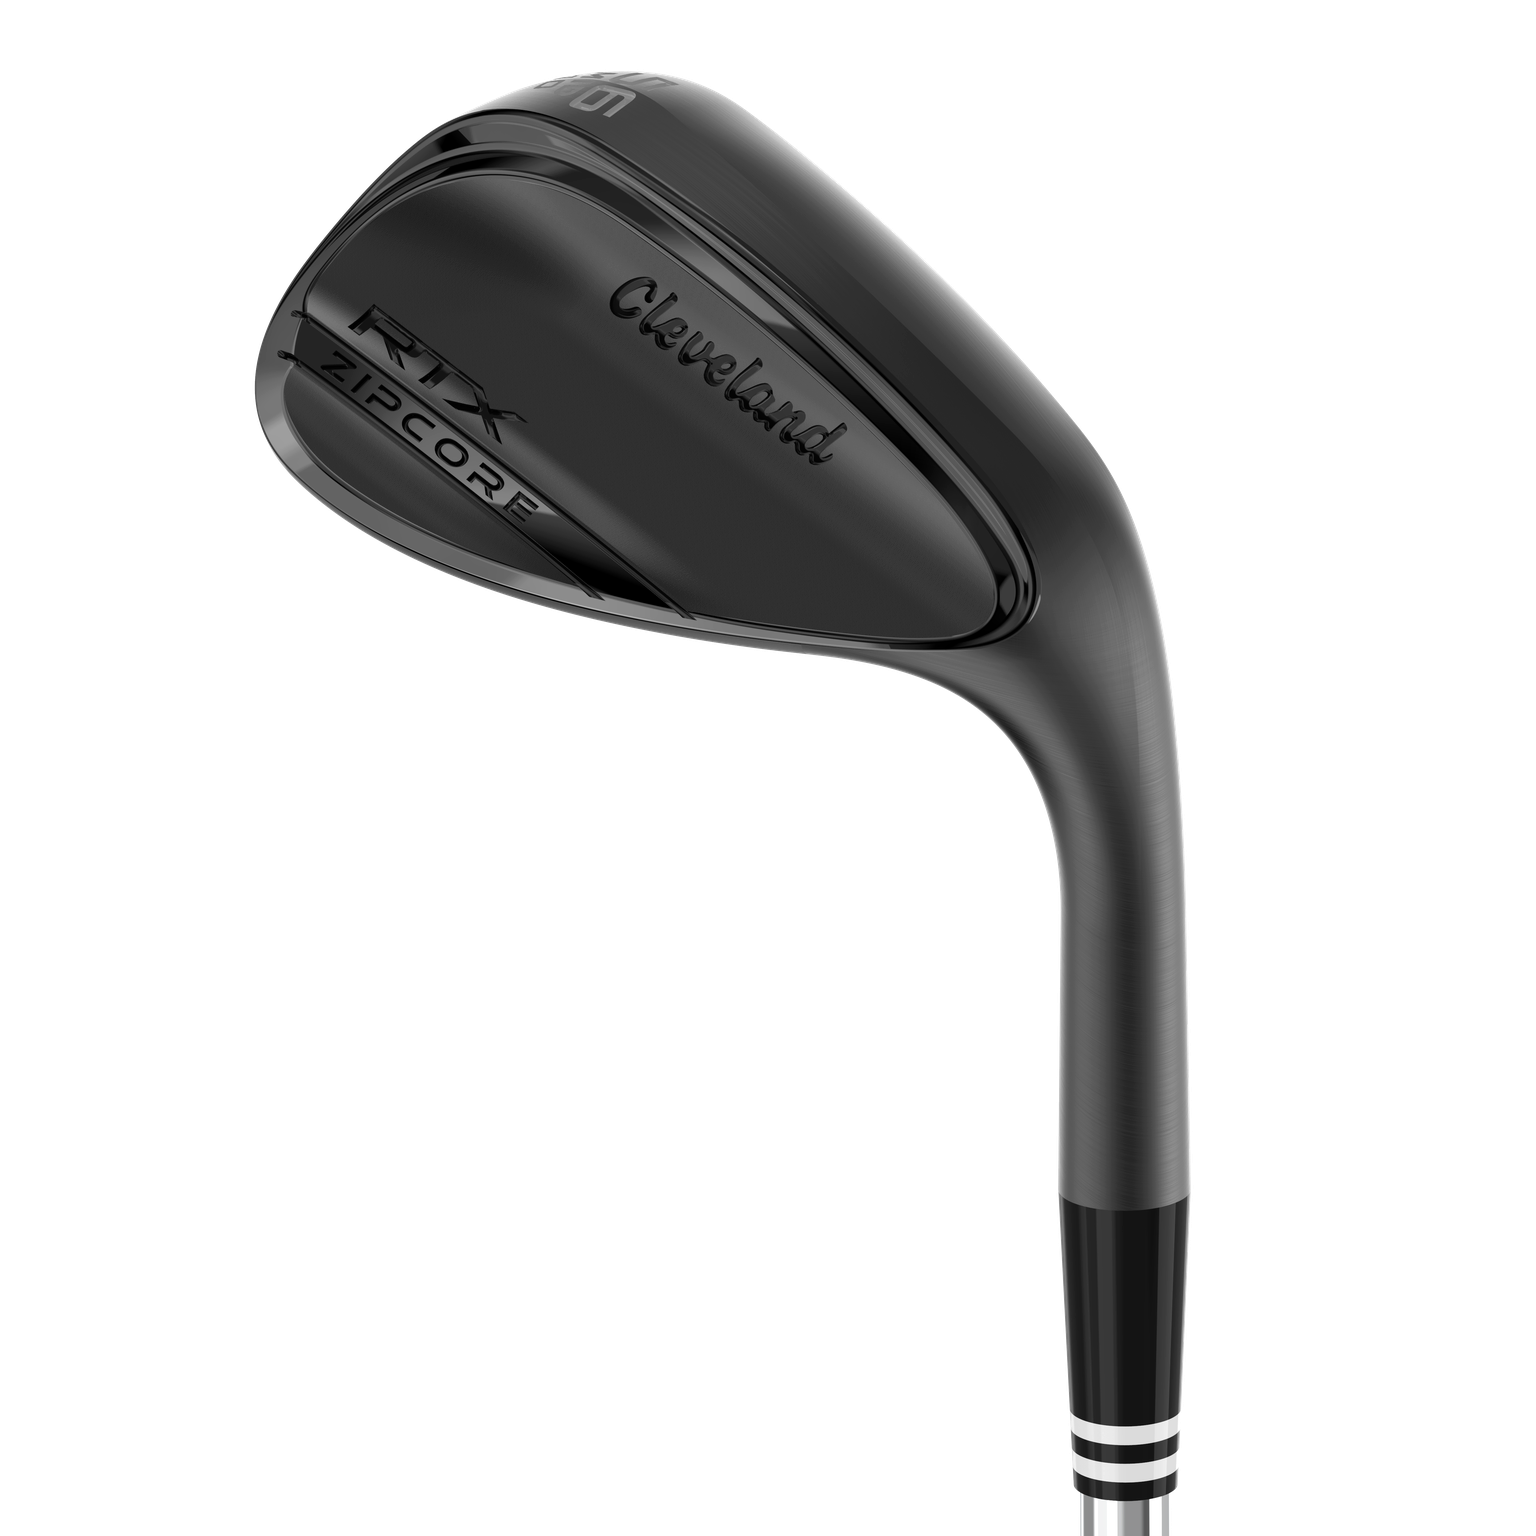 RTX Zipcore Black Satin Wedge with Steel Shaft | CLEVELAND 